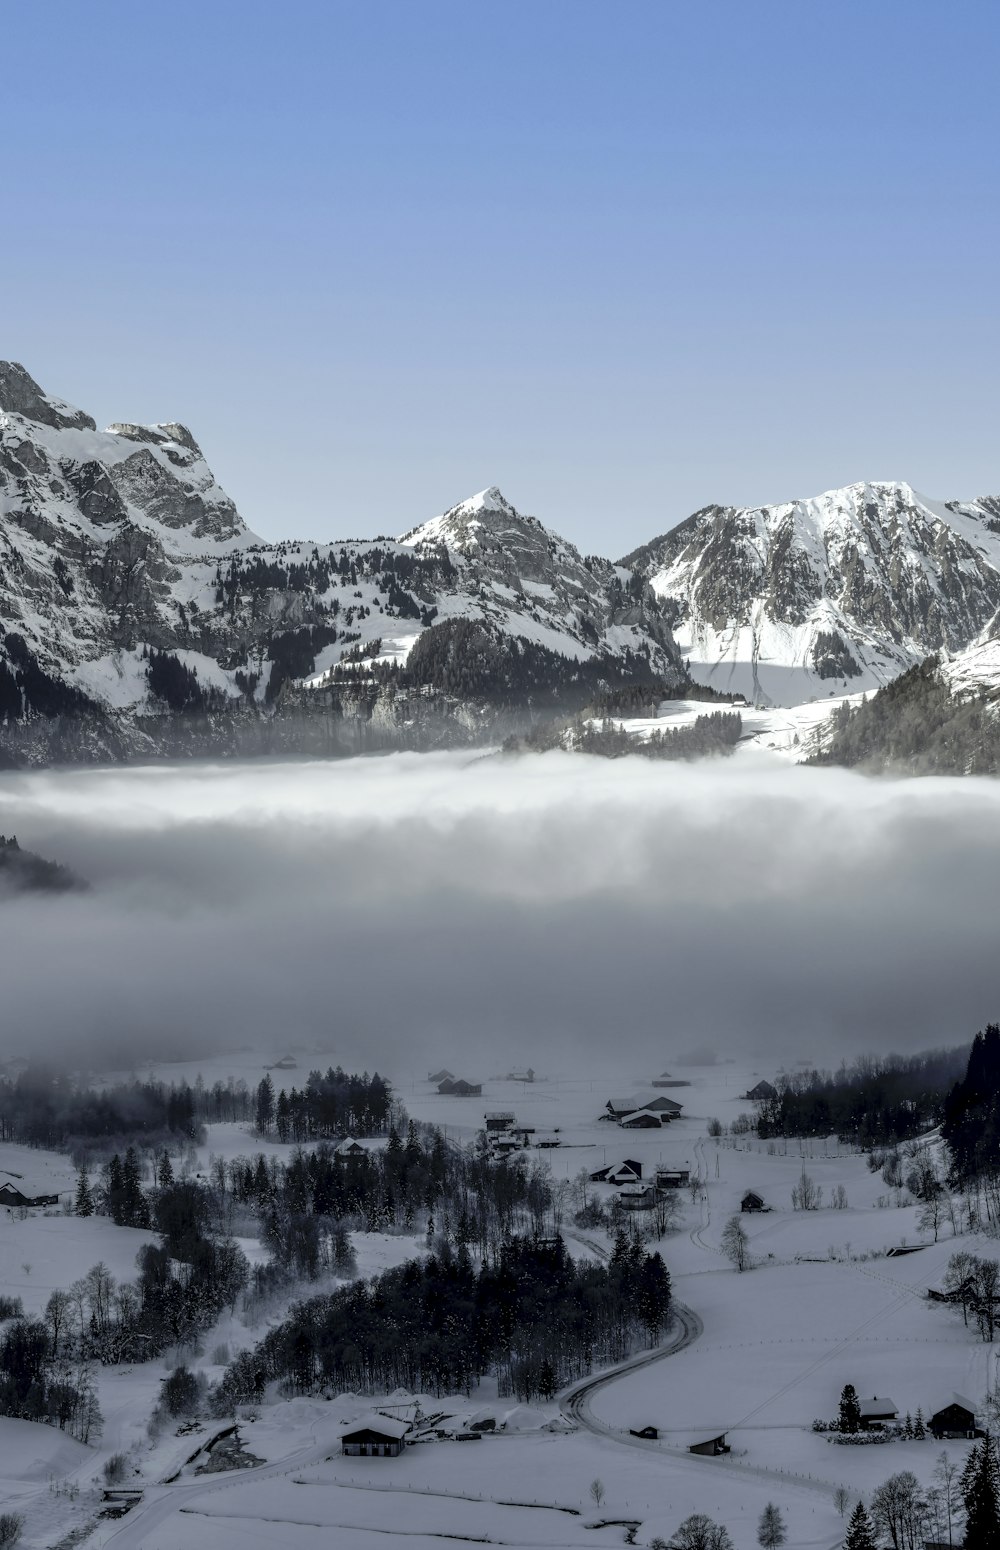 a mountain range covered in snow and clouds